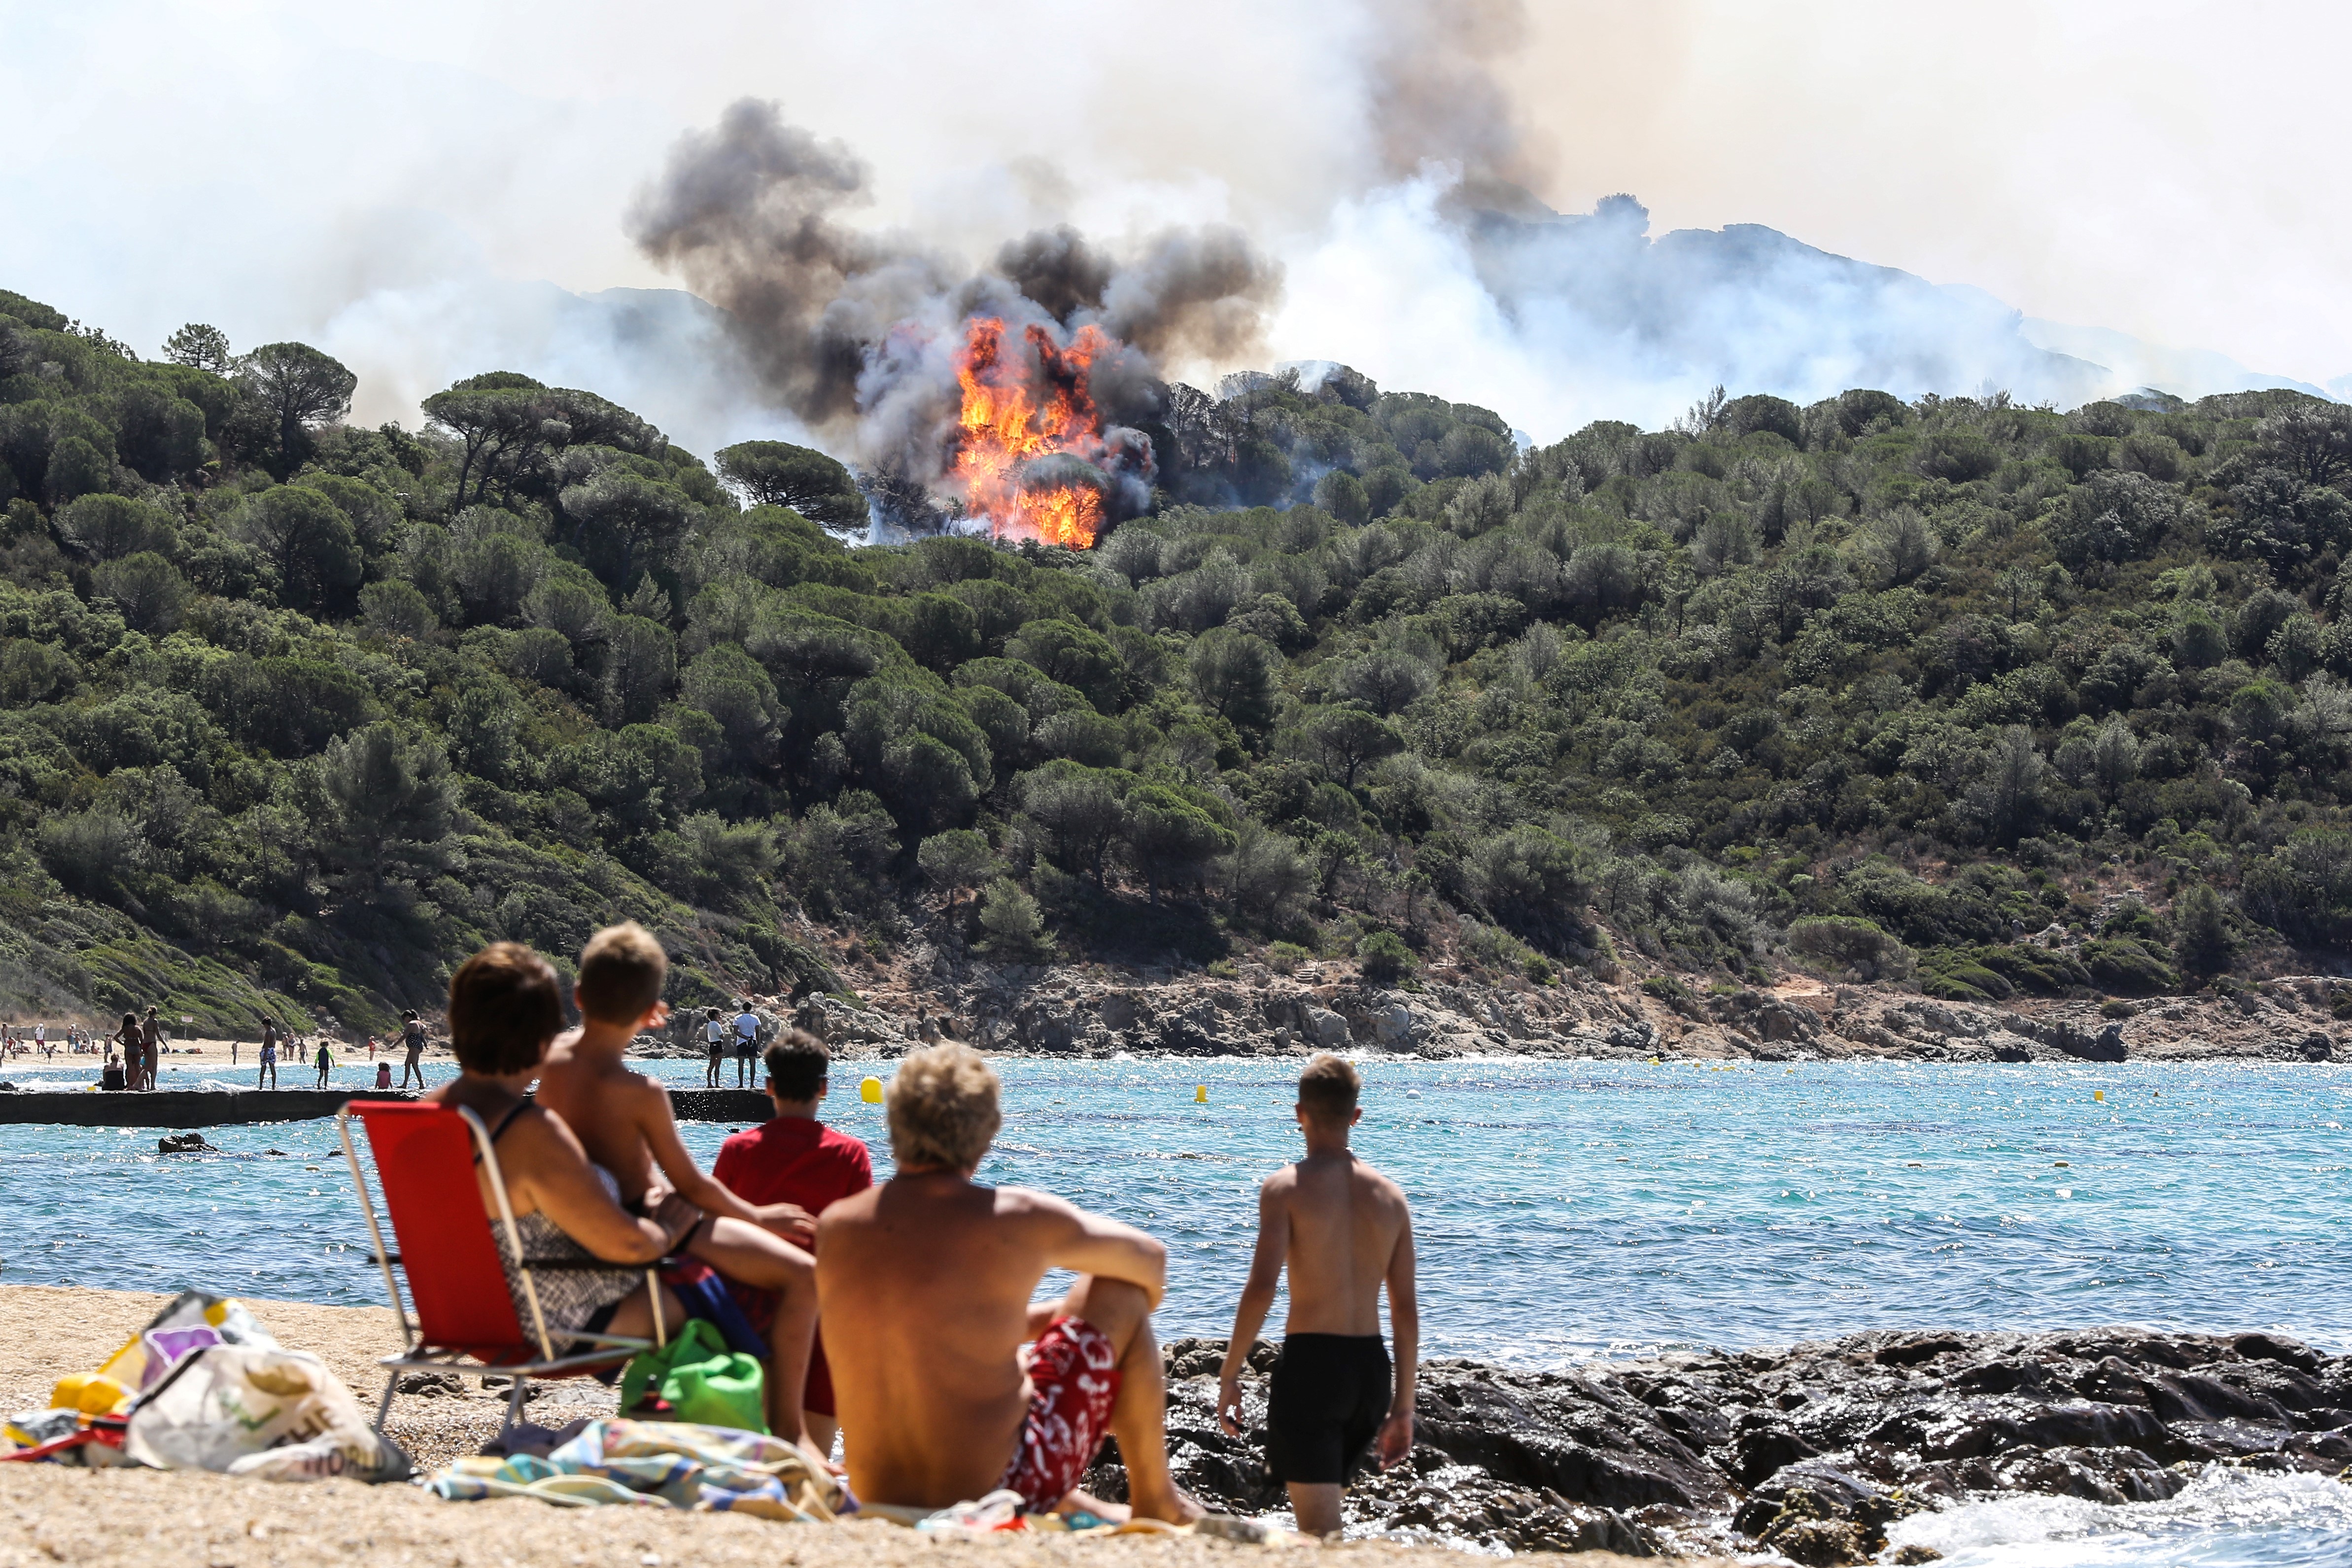 People enjoy the beach as they look at a forest fire in La Croix-Valmer, near Saint-Tropez, on July 25, 2017..Firefighters battle blazes that have consumed swathes of land in southeastern France for a second day, with one inferno out of control near the chic resort of Saint-Tropez, emergency services say.